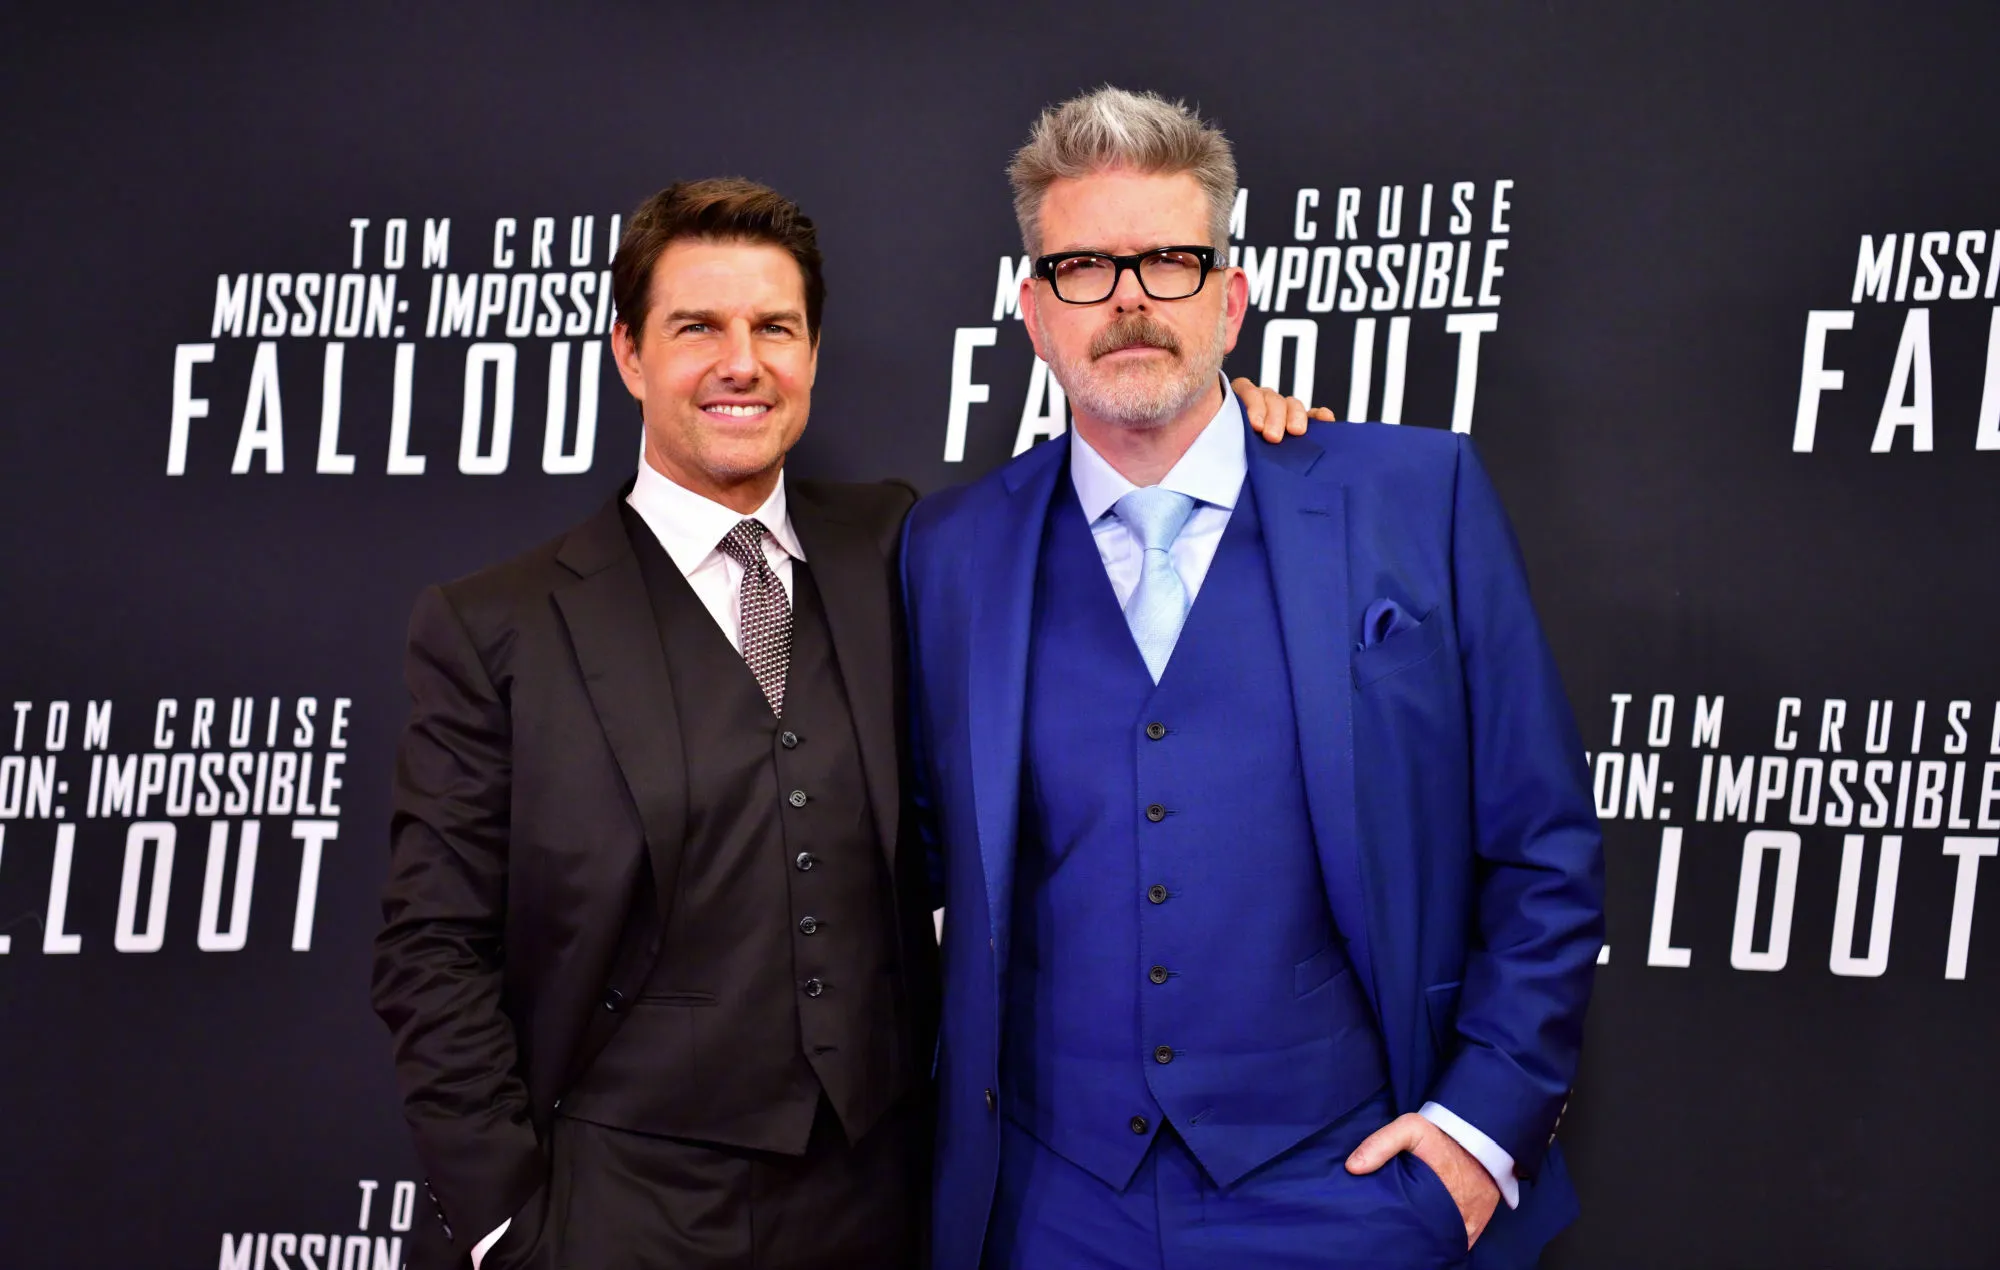 Tom Cruise plans to star in an original musical with singing and dancing elements | FMV6